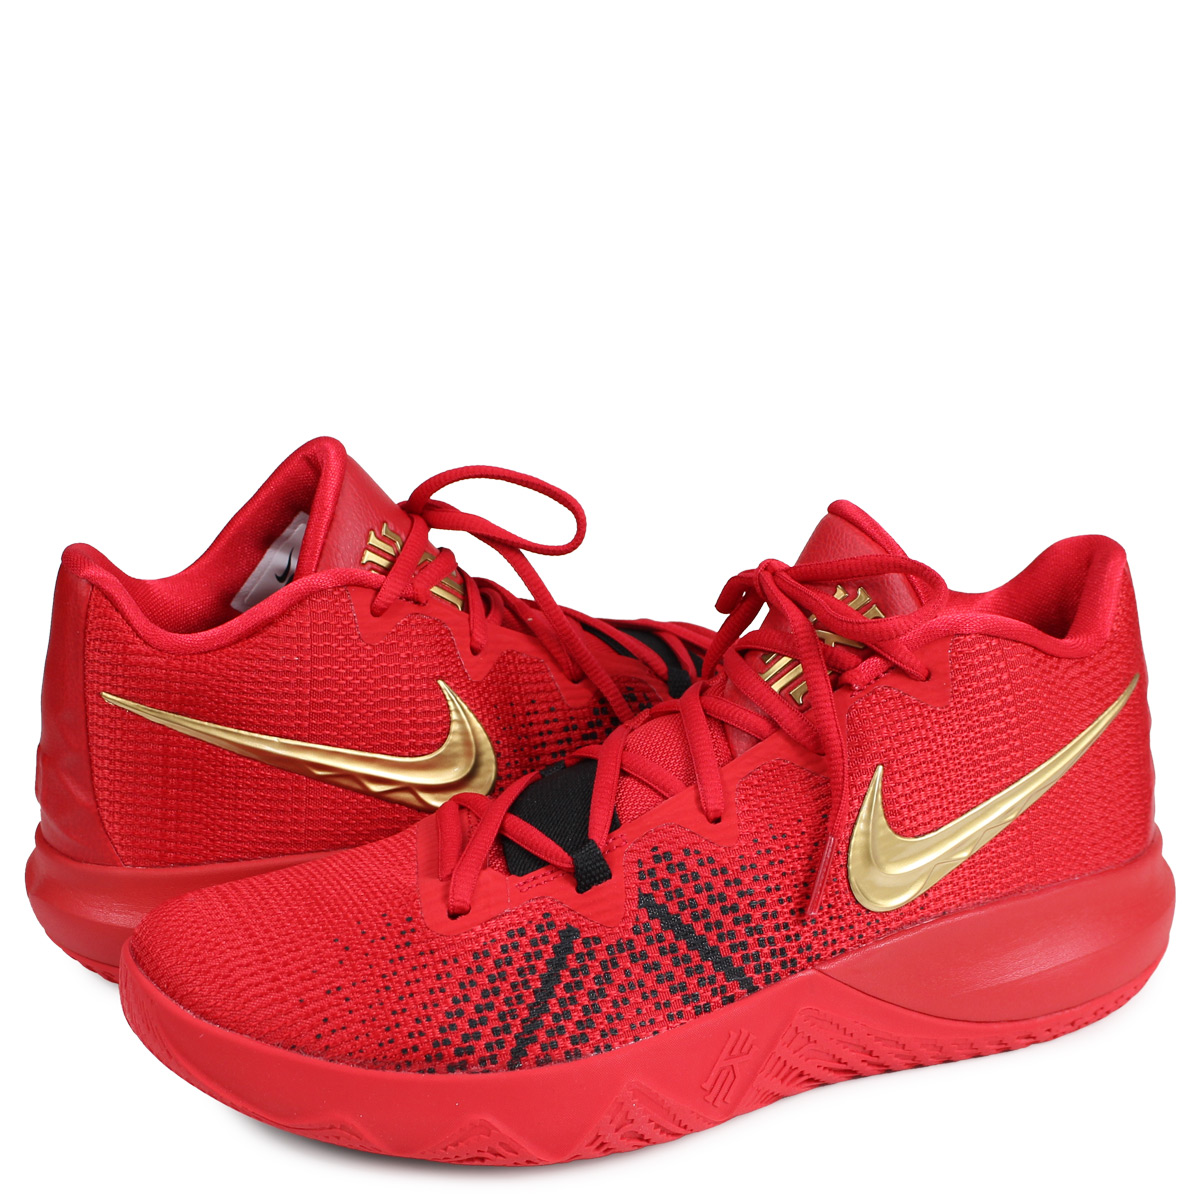 kyrie flytrap red